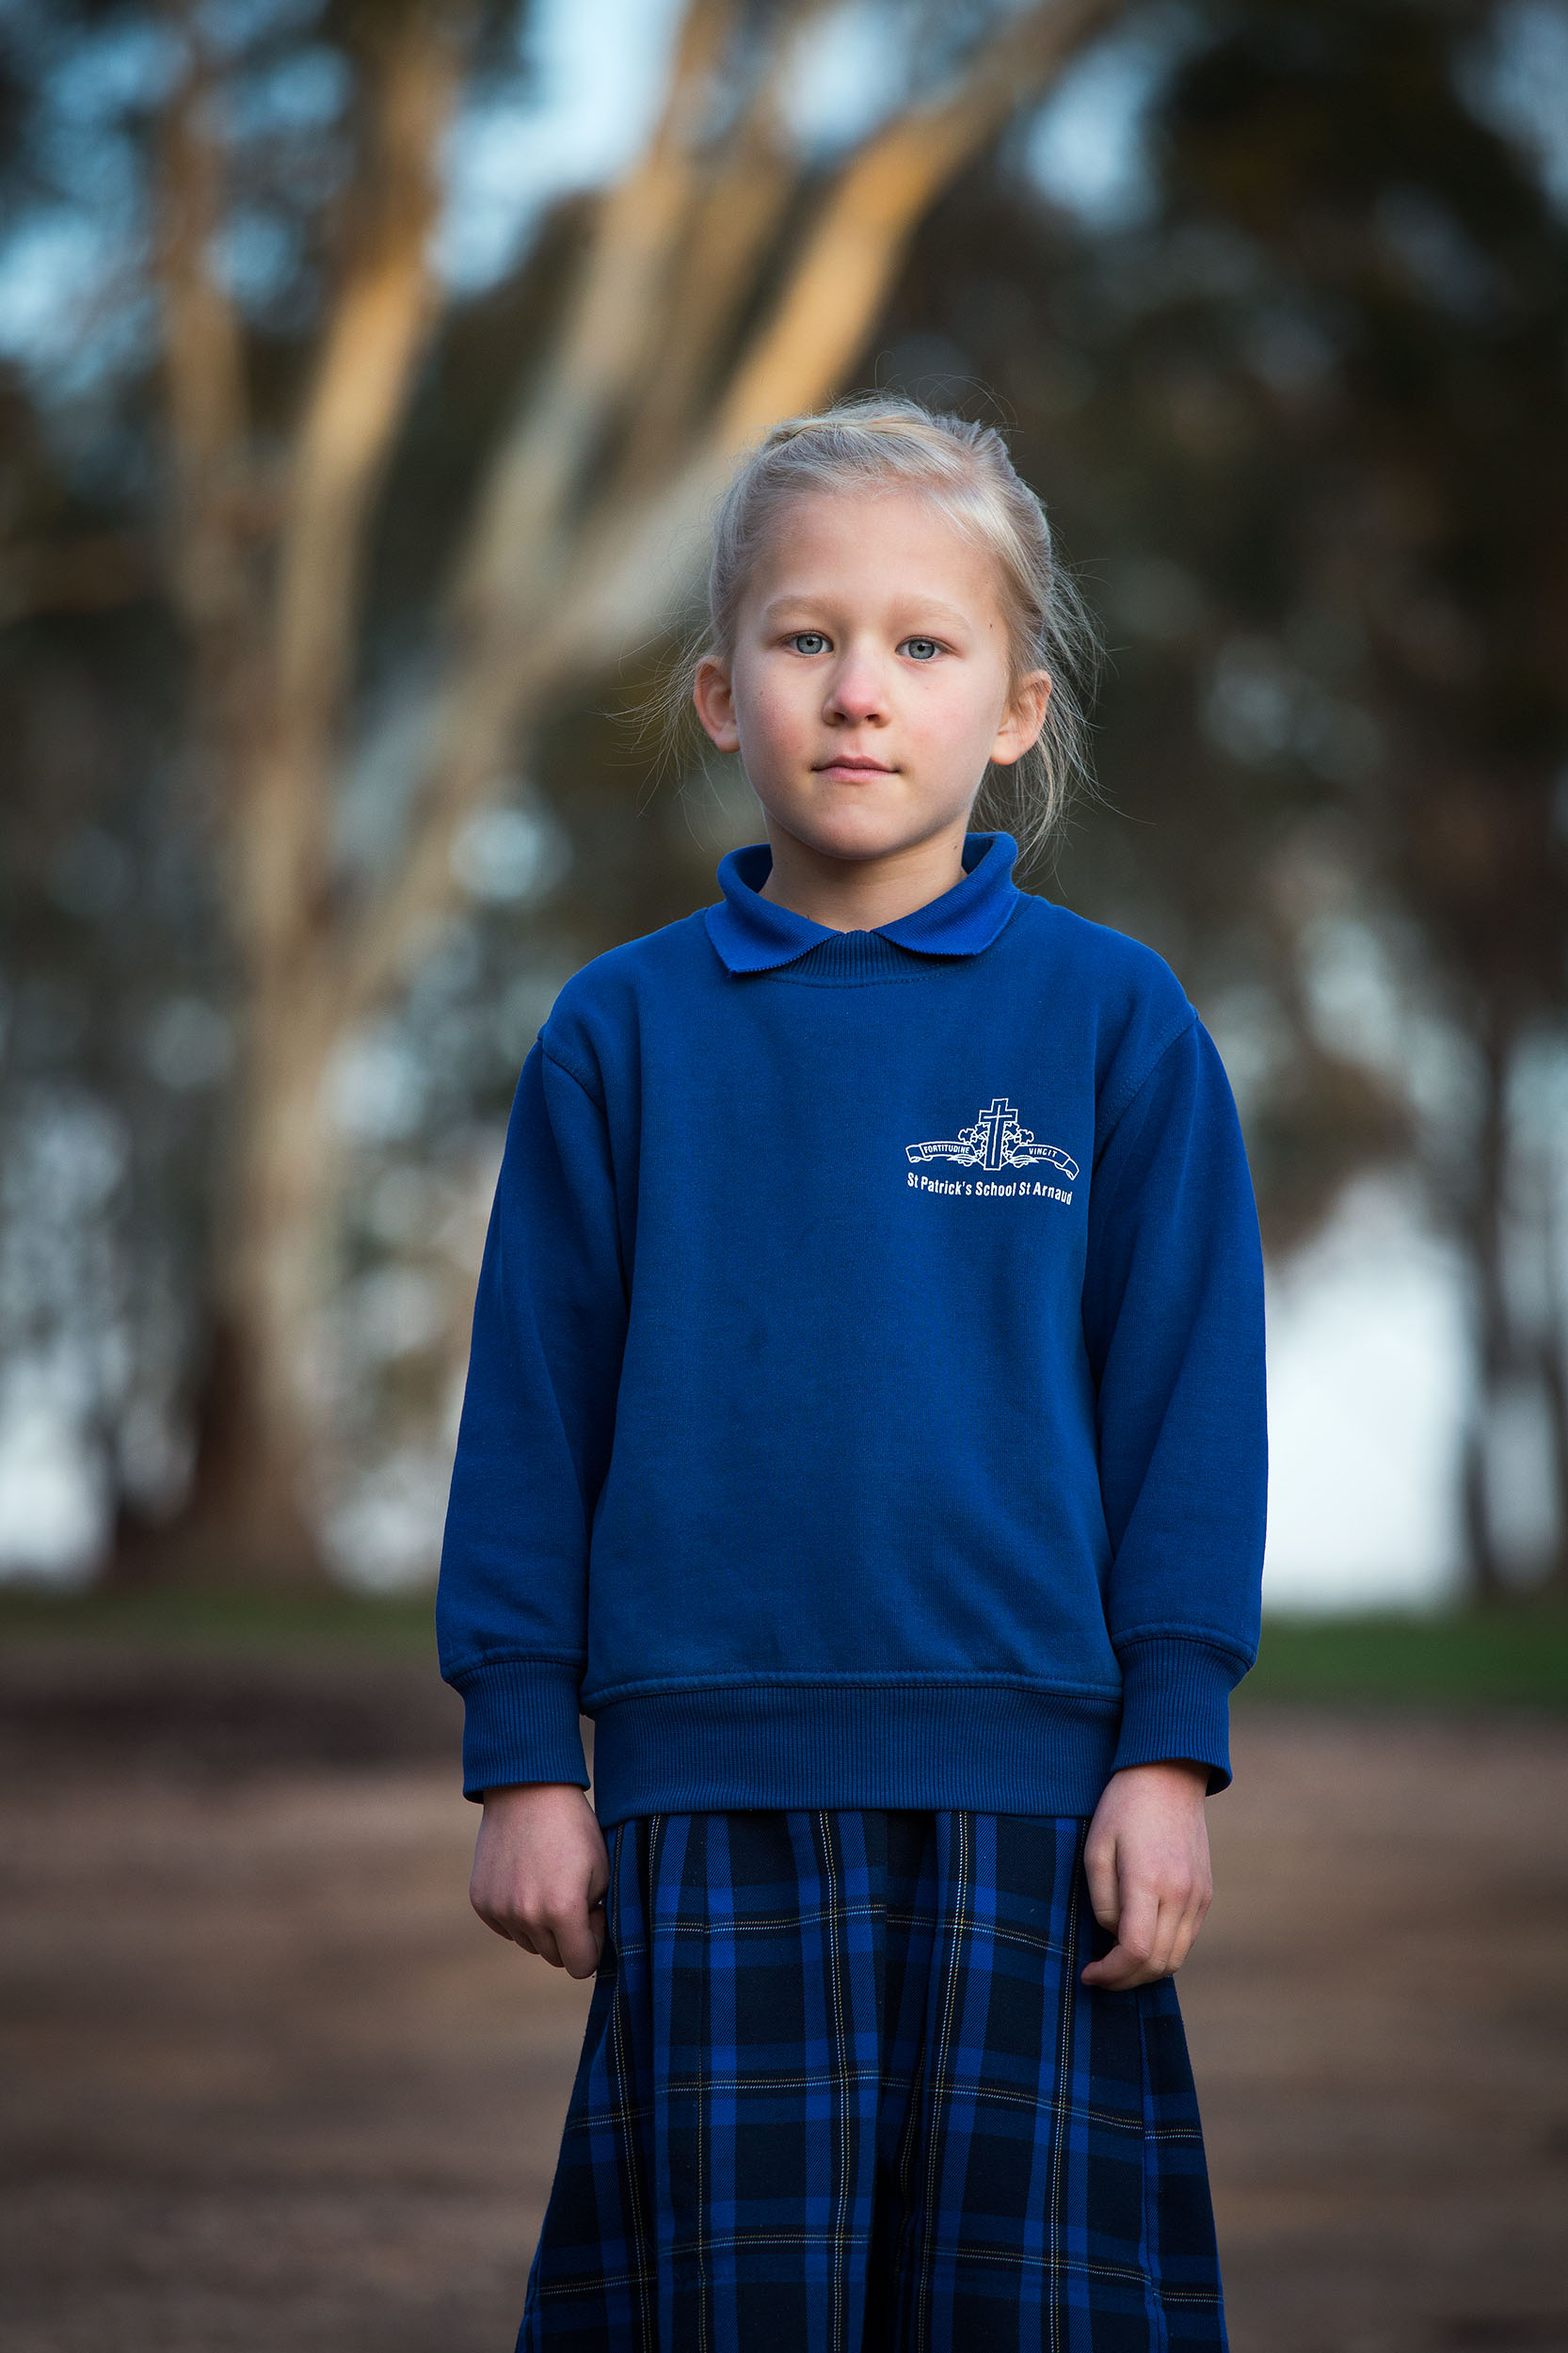 Seven year old Lara, ready to leave for school, St Arnaud, VIC.